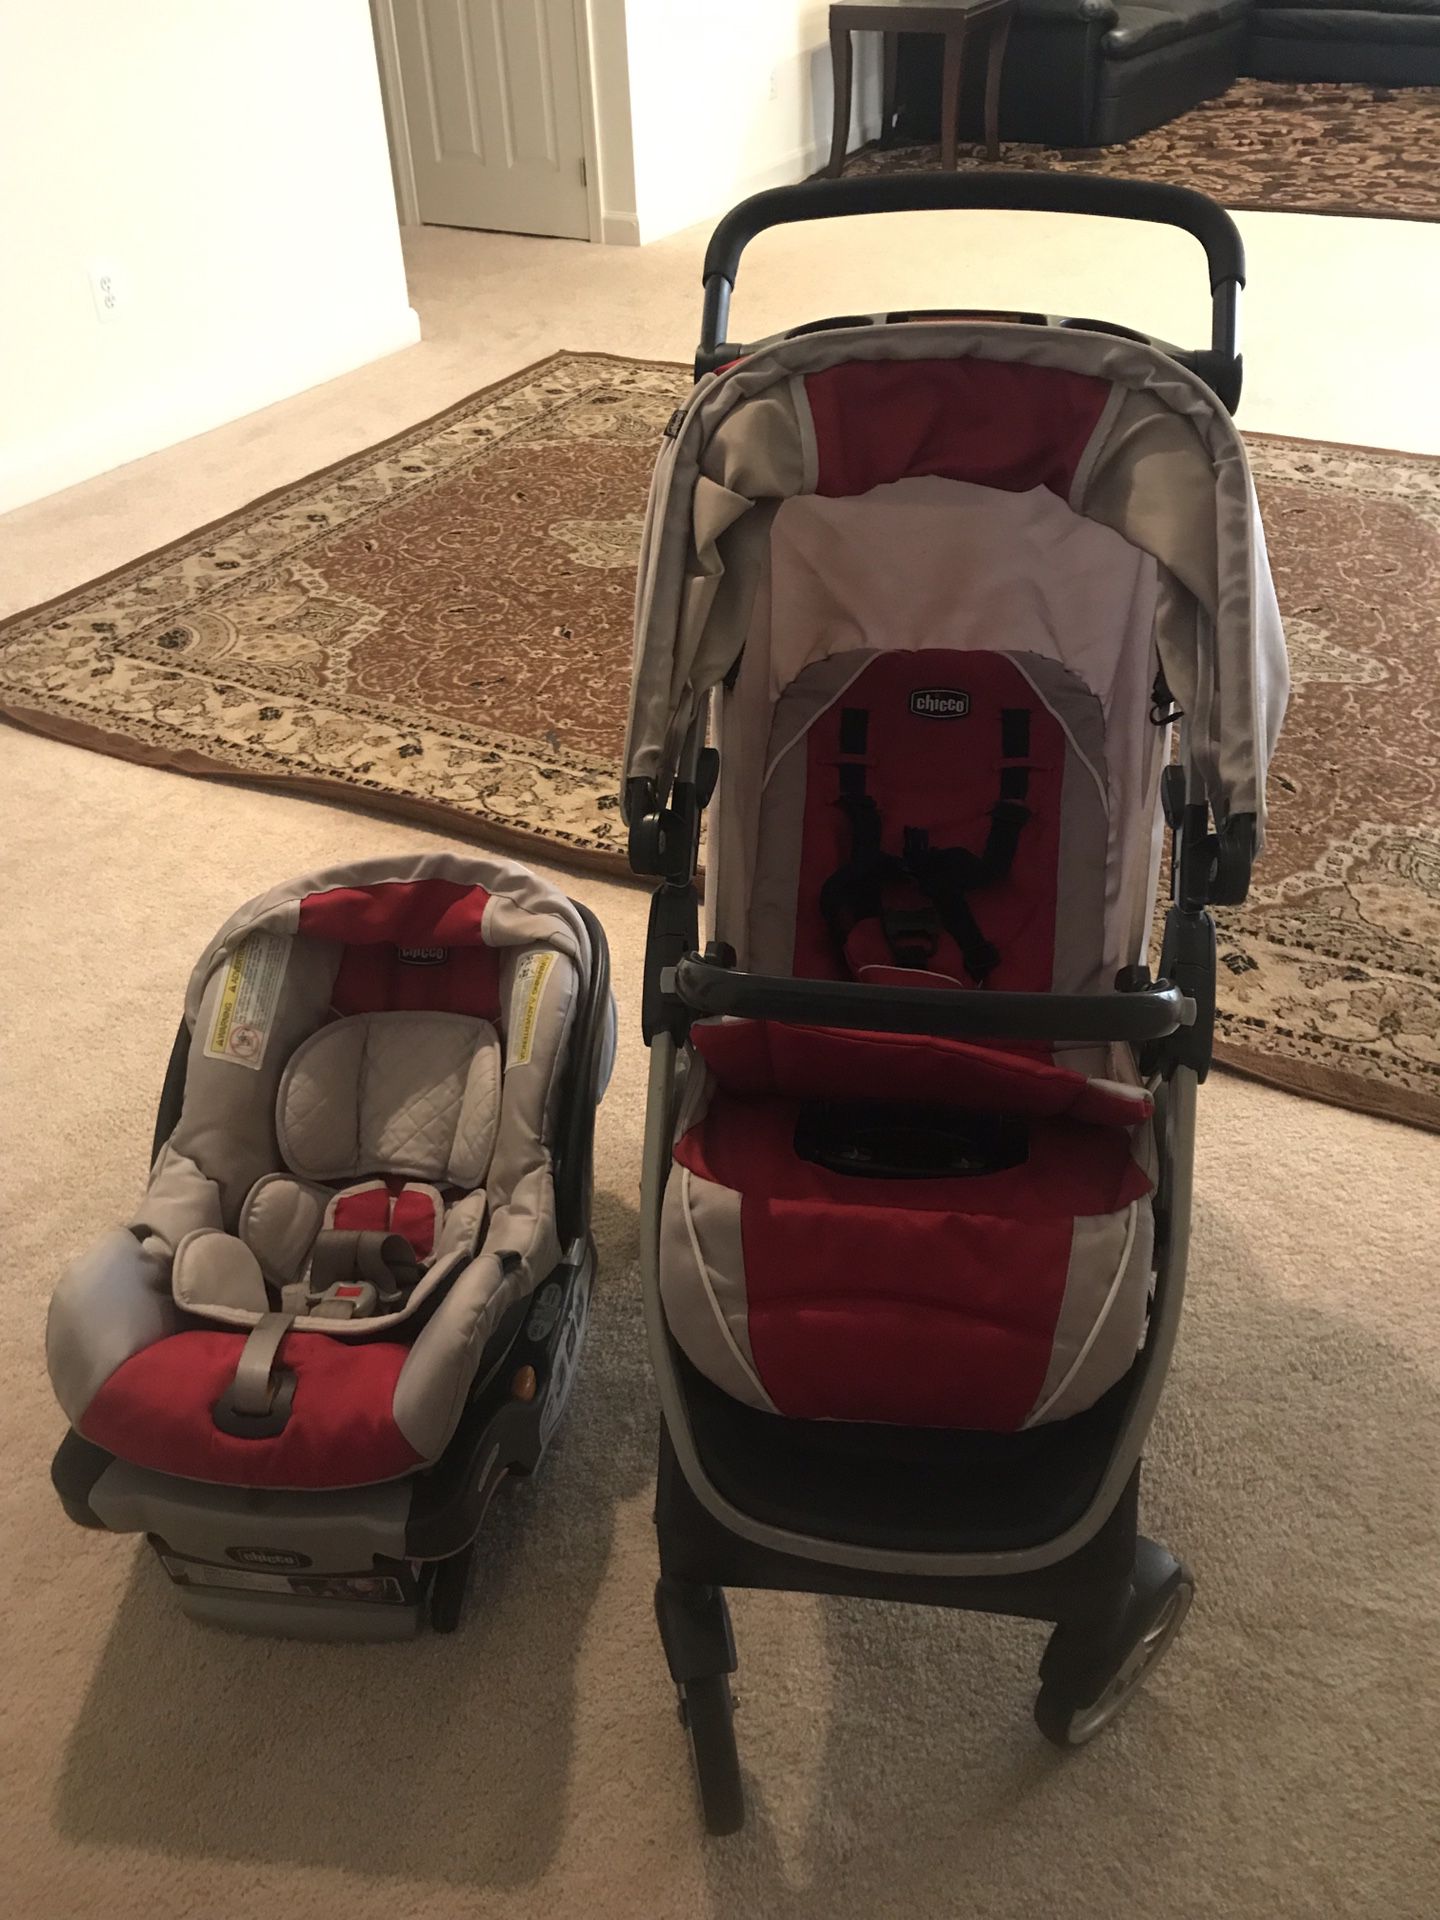 Chicco stroller and seat